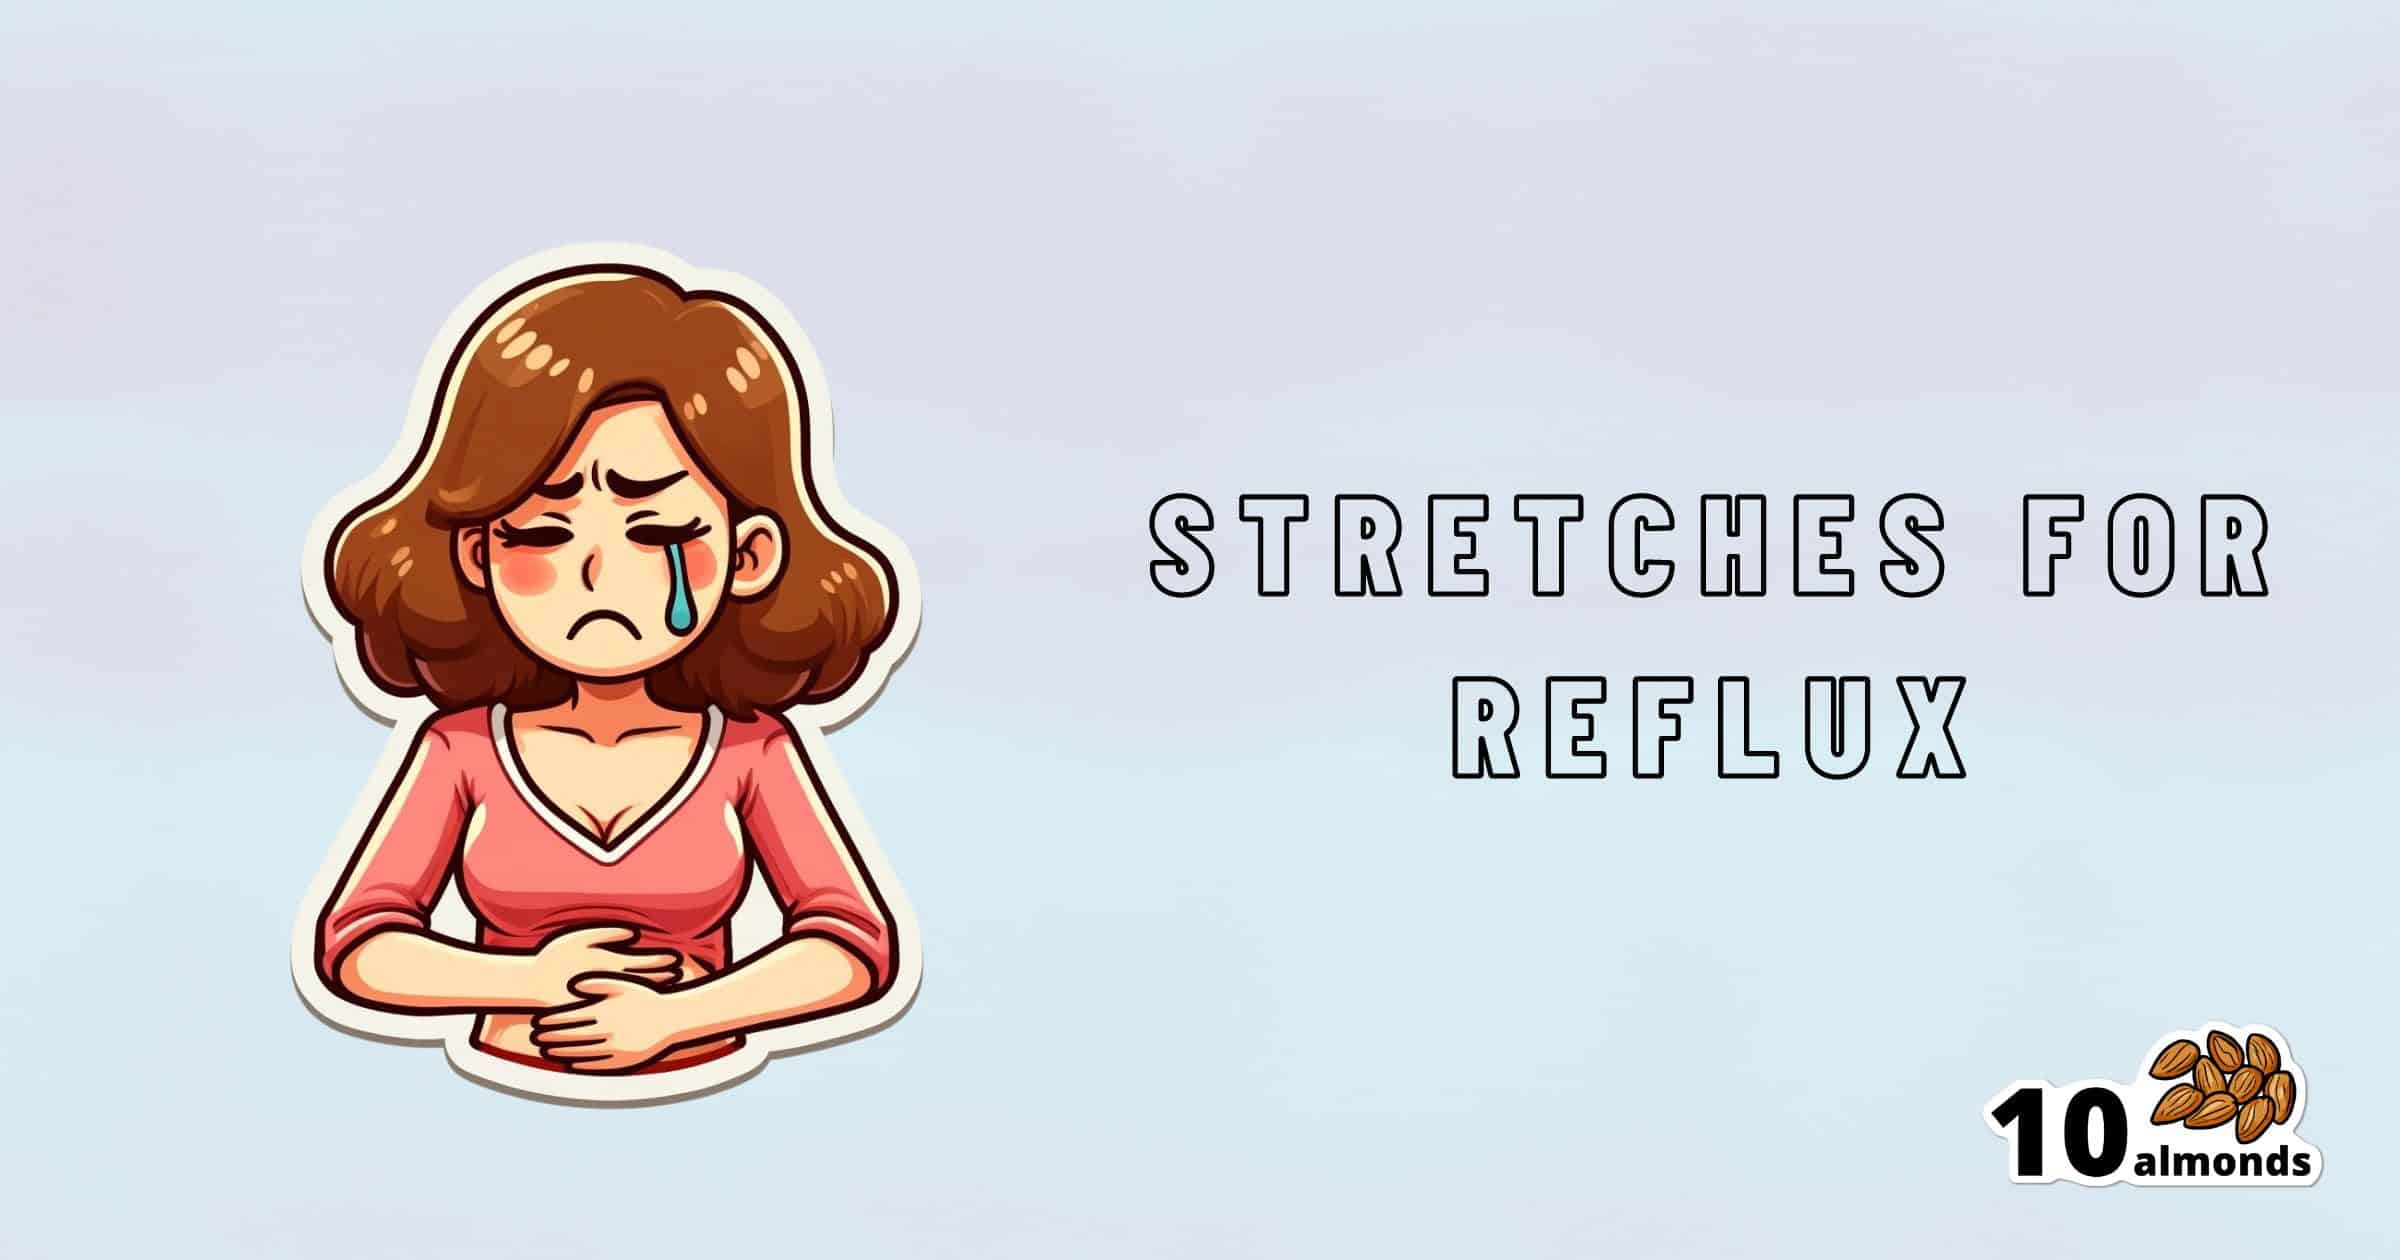 Illustration of a woman with shoulder-length brown hair, wearing a pink top, holding her stomach with a pained expression and a tear sliding down her cheek. The text "STRETCHES AND EXERCISES FOR ACID REFLUX" is written next to her, accompanied by a small "10 almonds" logo in the corner.